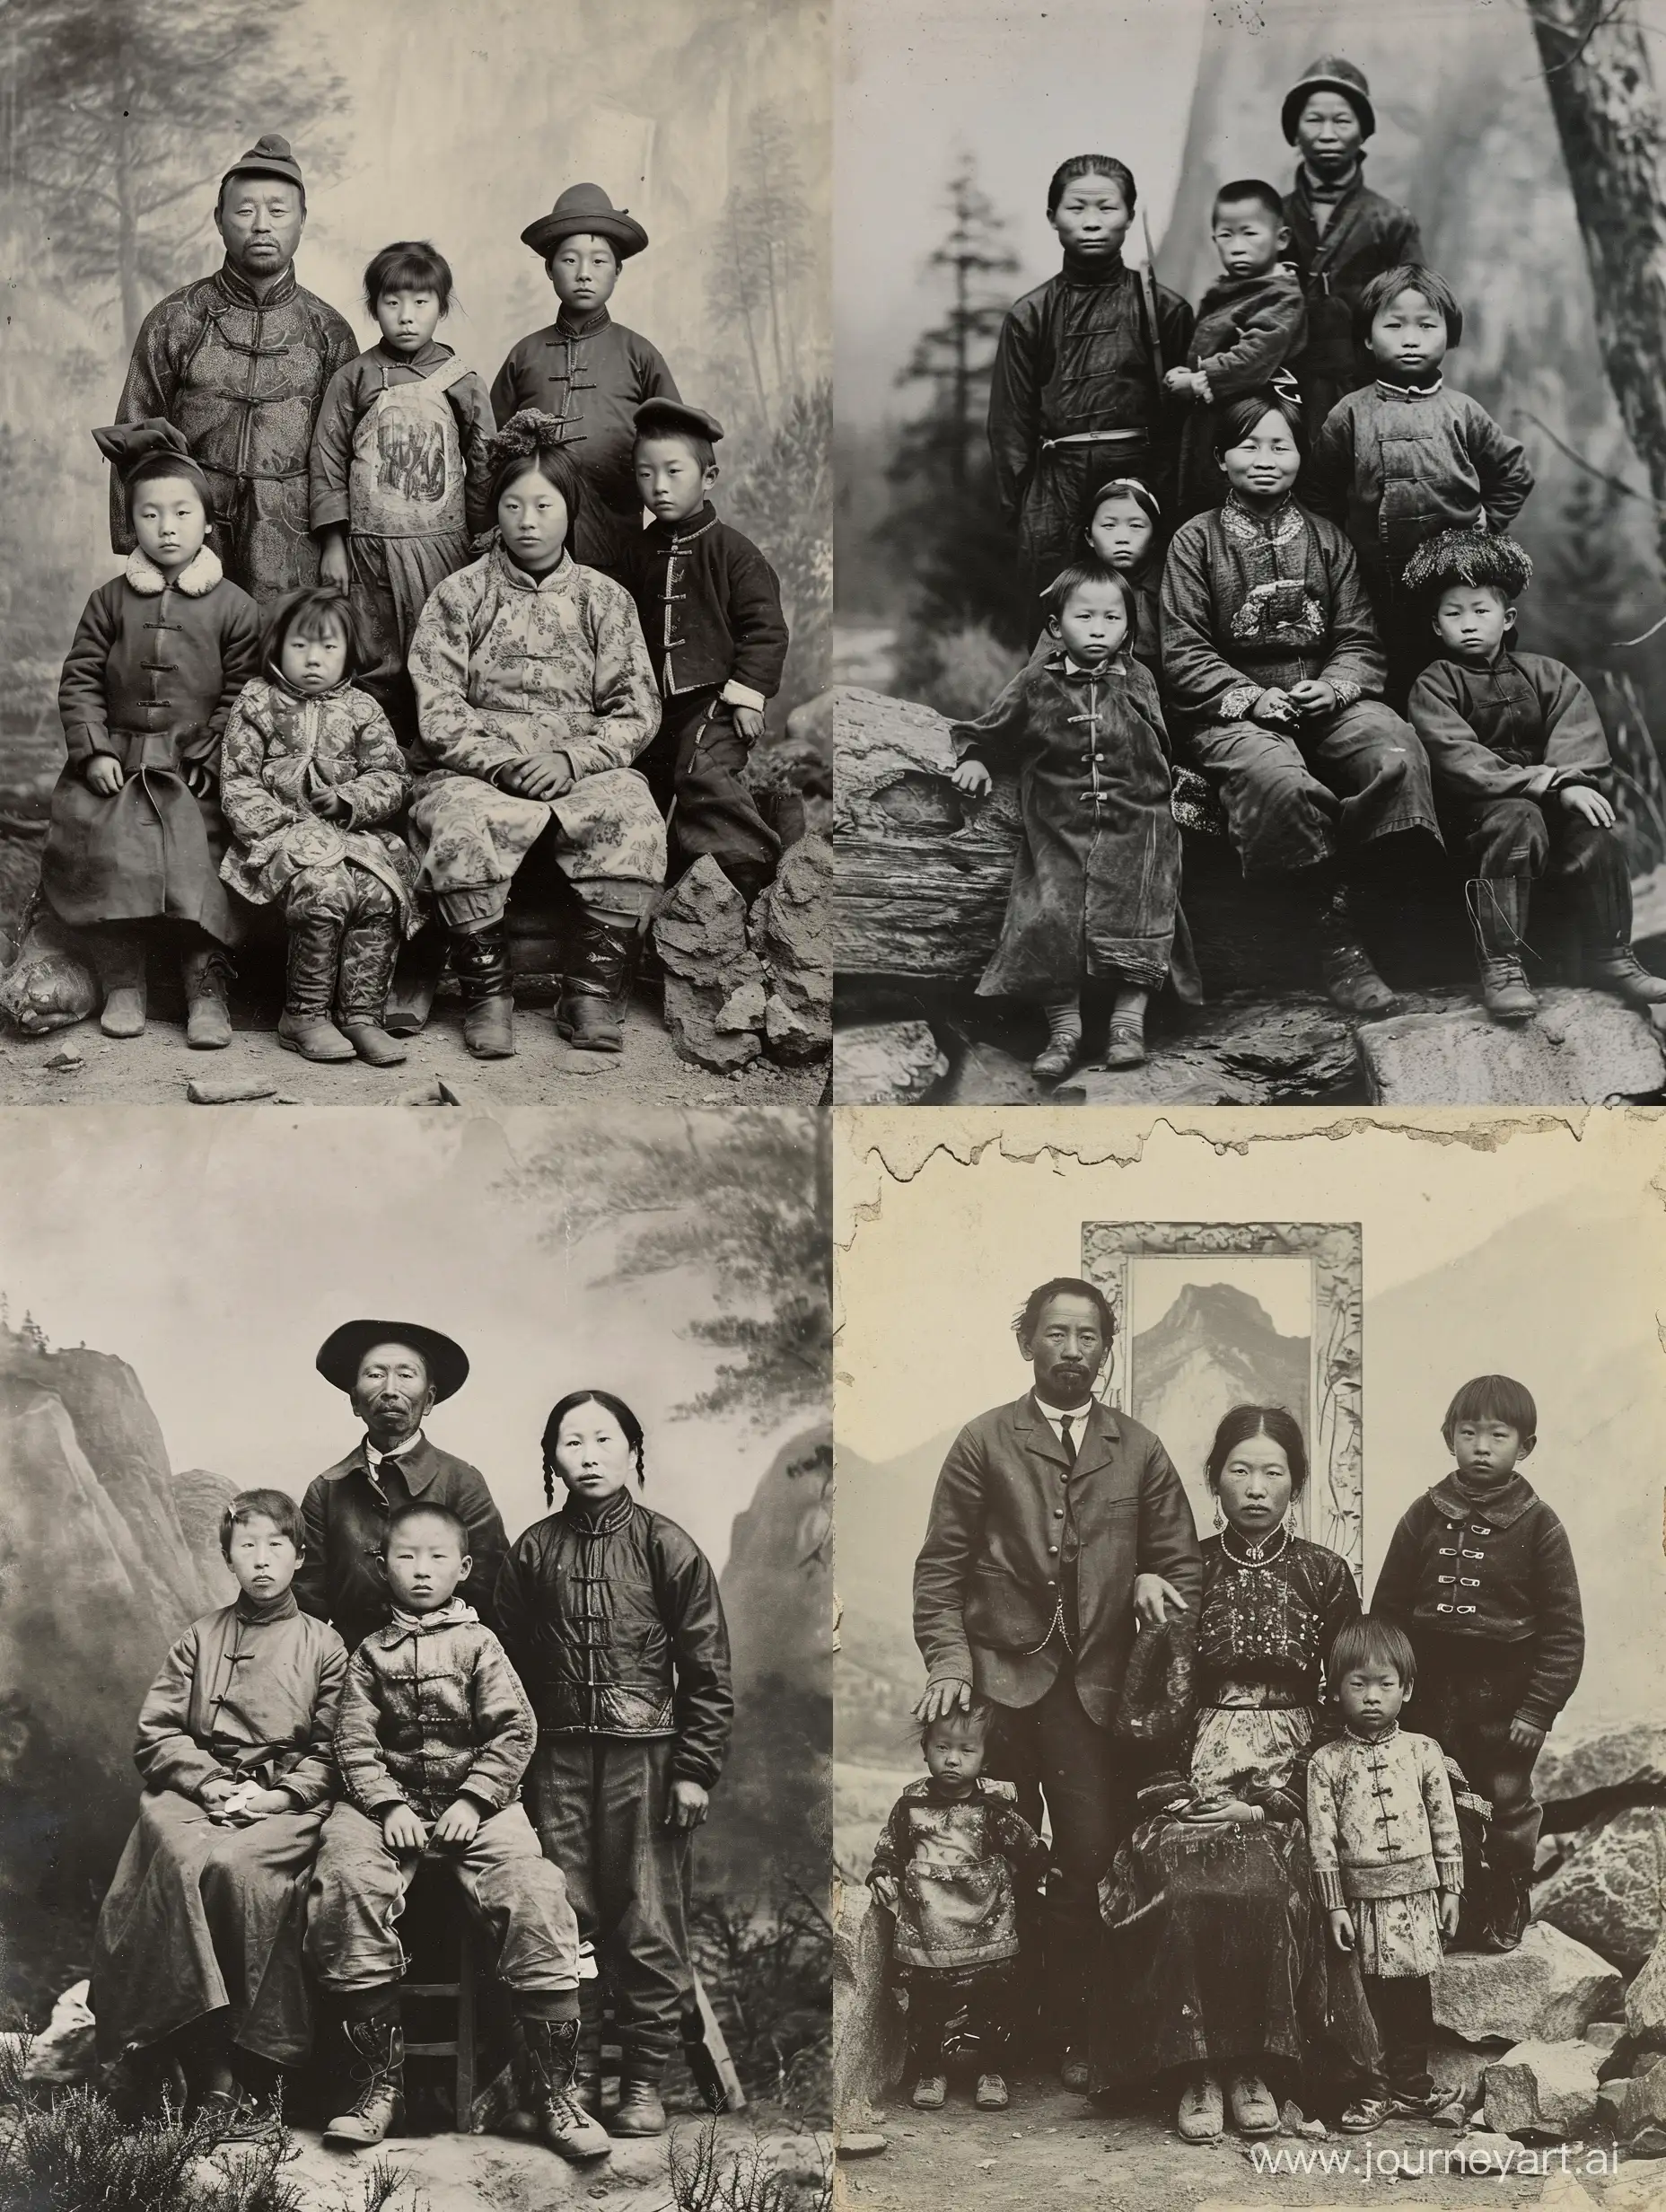 Chinese-Workers-Family-Portrait-at-Yosemite-in-Late-1800s